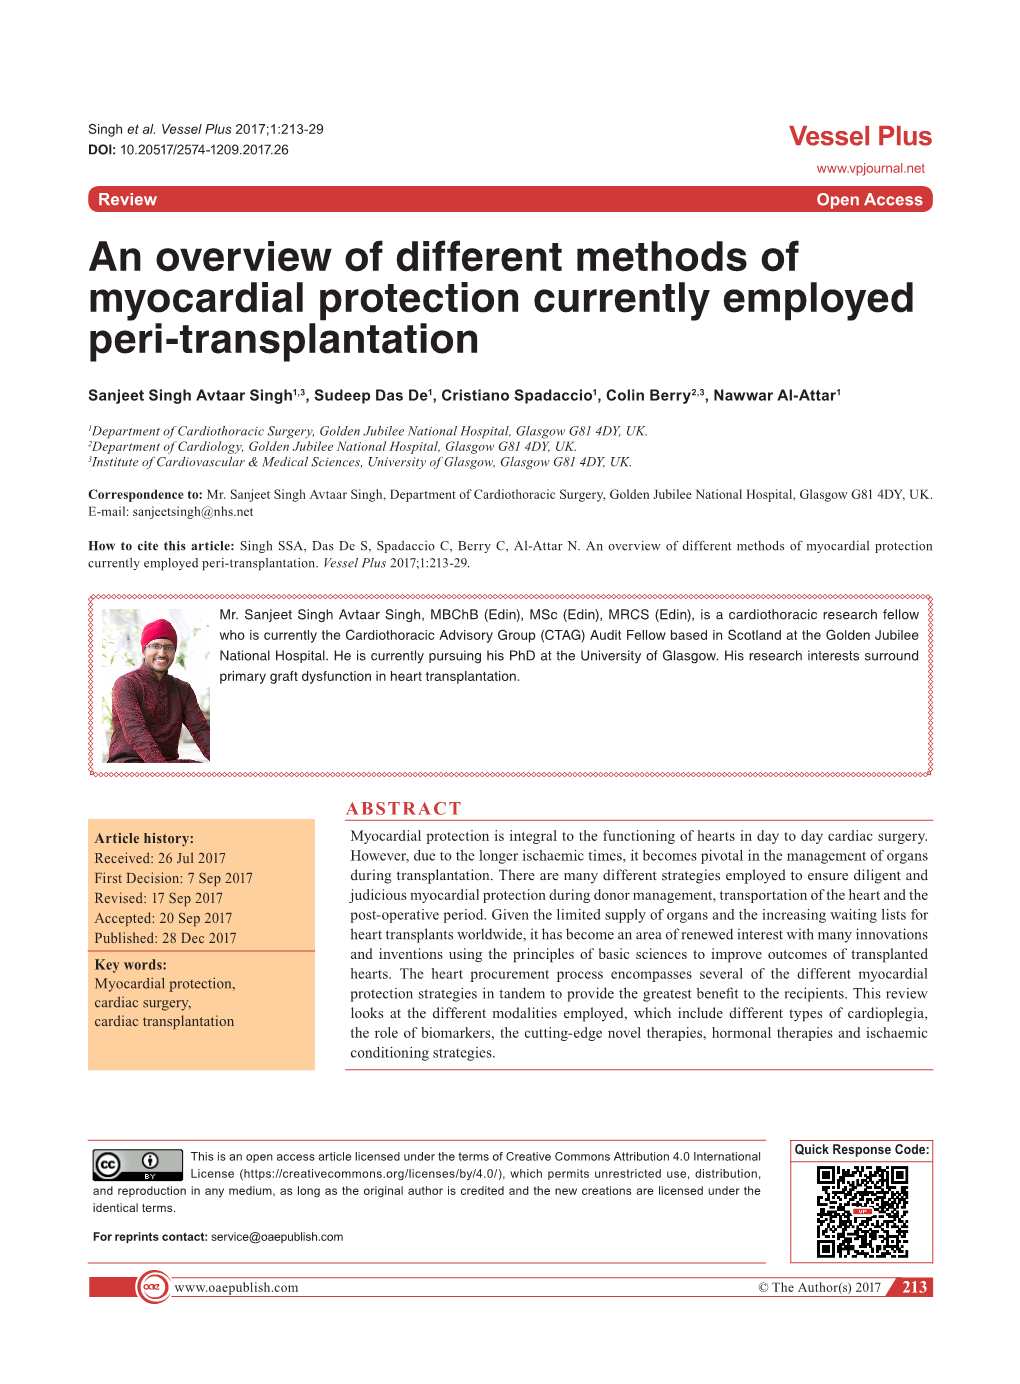 An Overview of Different Methods of Myocardial Protection Currently Employed Peri-Transplantation